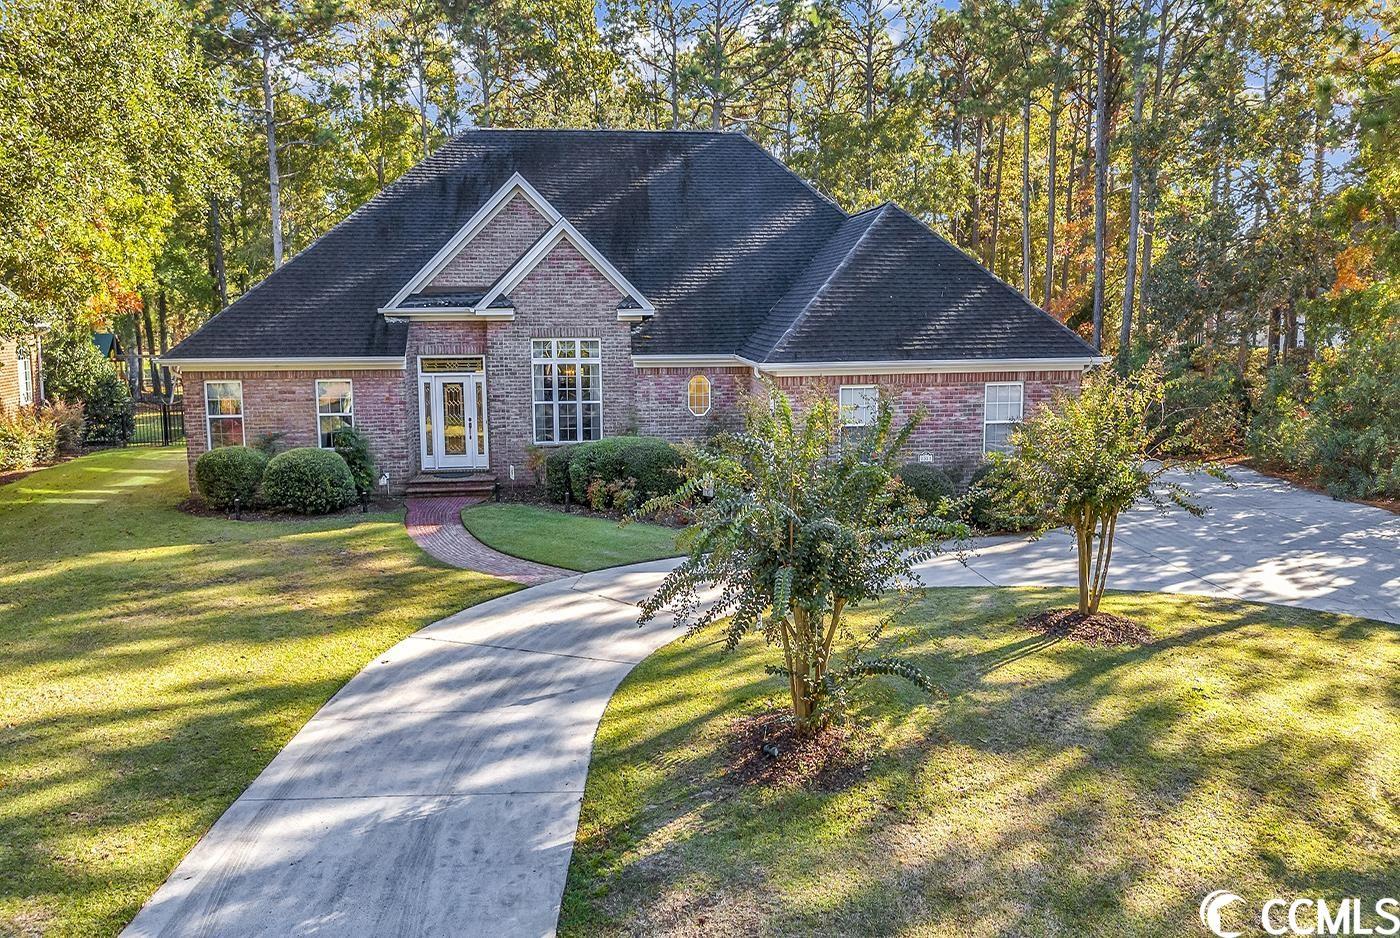 Photo one of 1313 Links Rd. Myrtle Beach SC 29575 | MLS 2402536